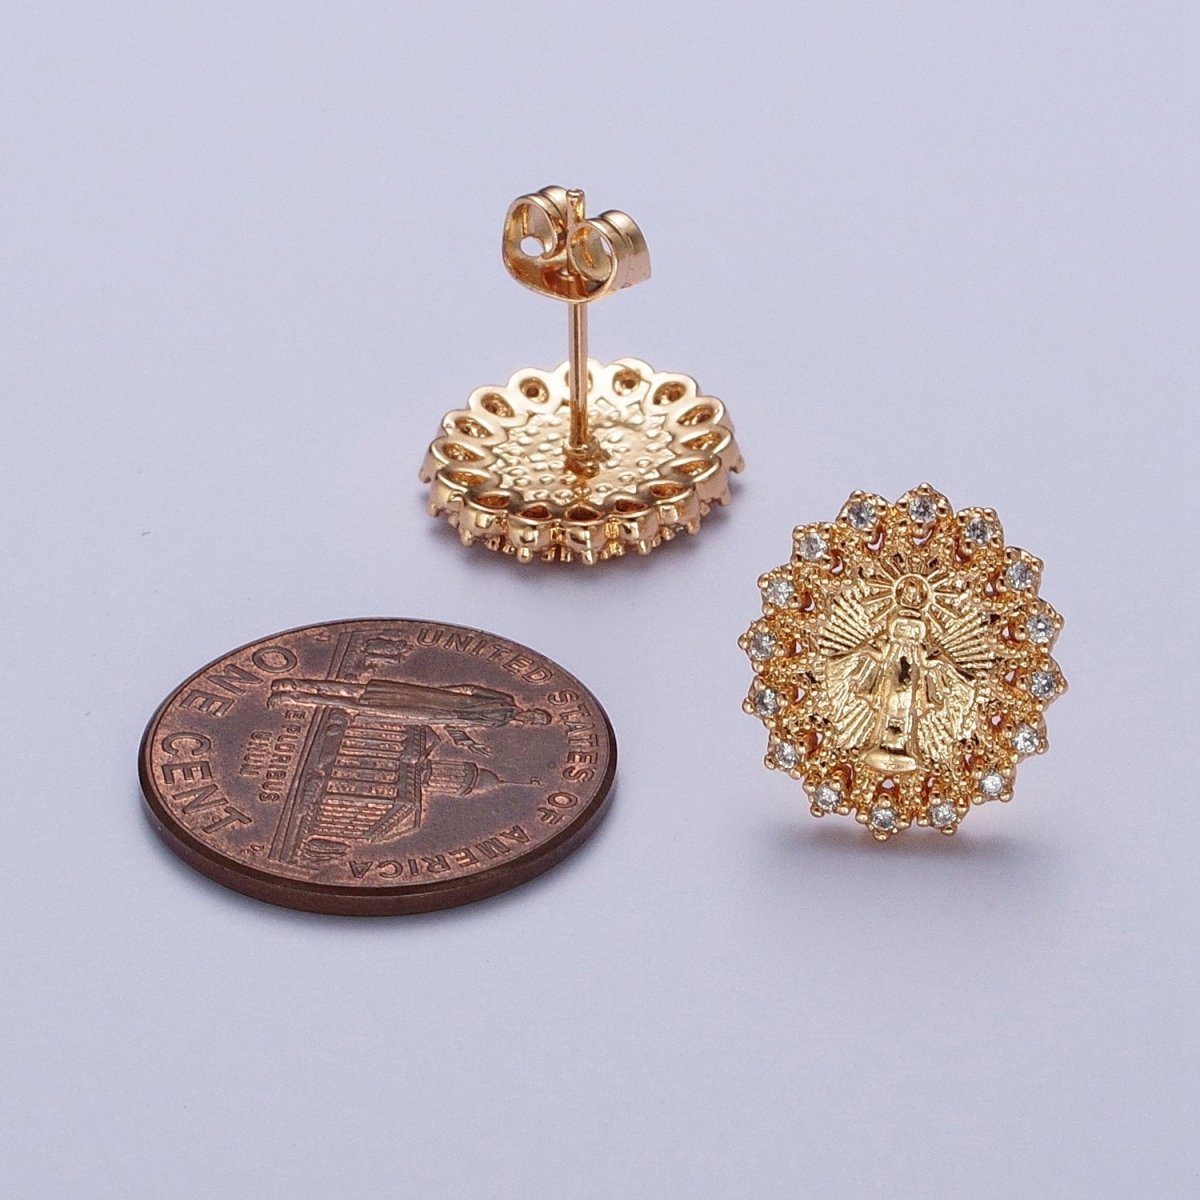 Micro Pave Gold Virgin Mary Stud Earring SUN Medallion Miraculous Lady Earring Catholic Religious Jewelry Gift AE-1044 - DLUXCA